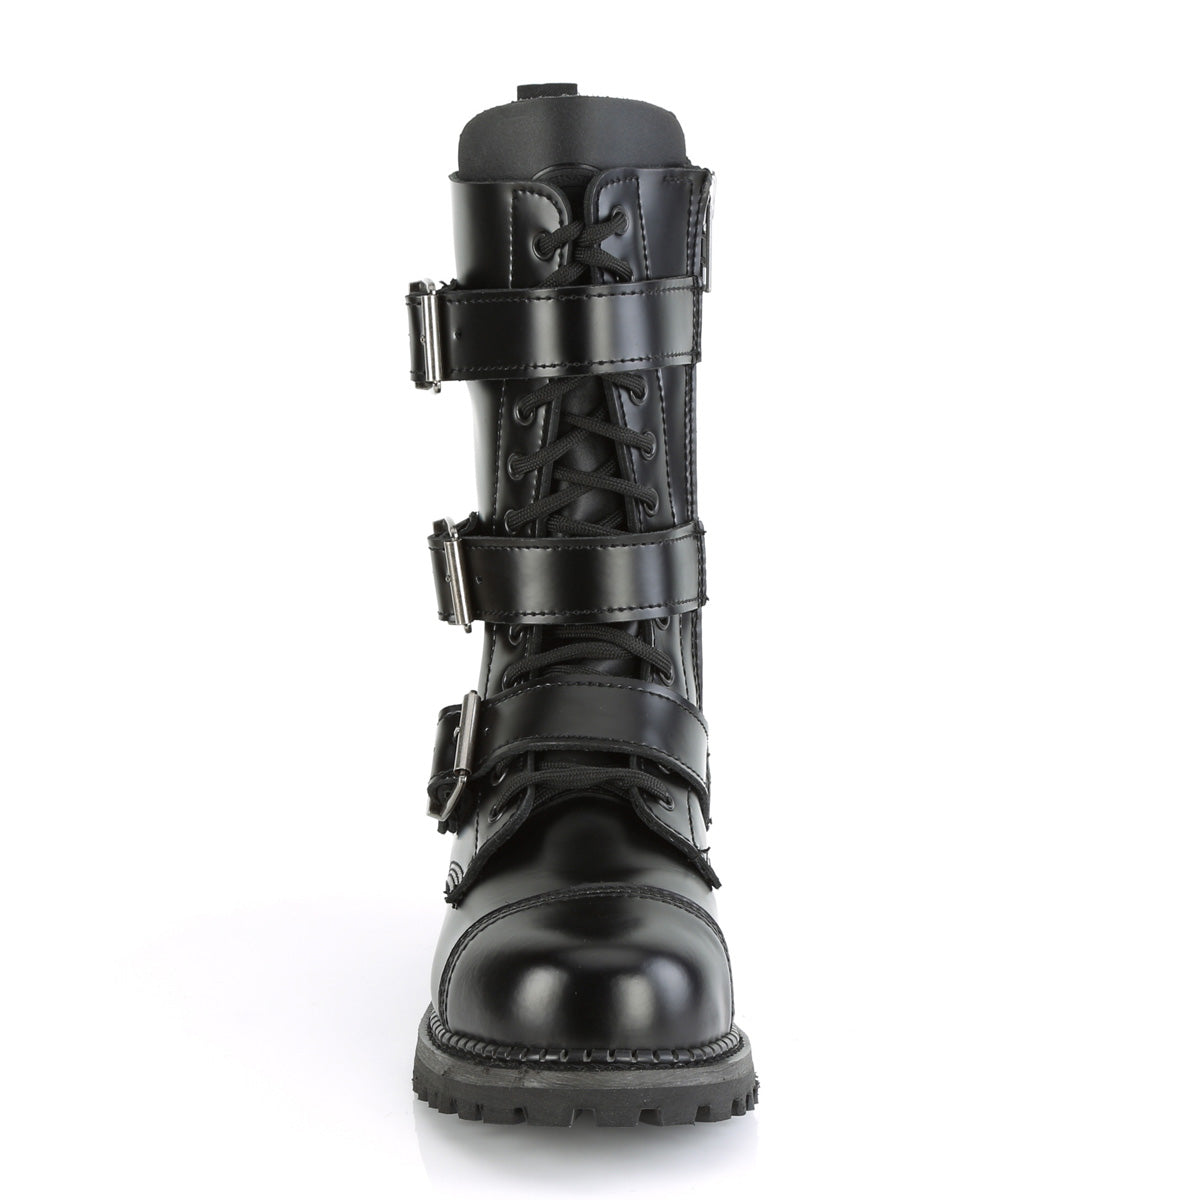 RIOT-12BK Black Leather Ankle Boot Demonia